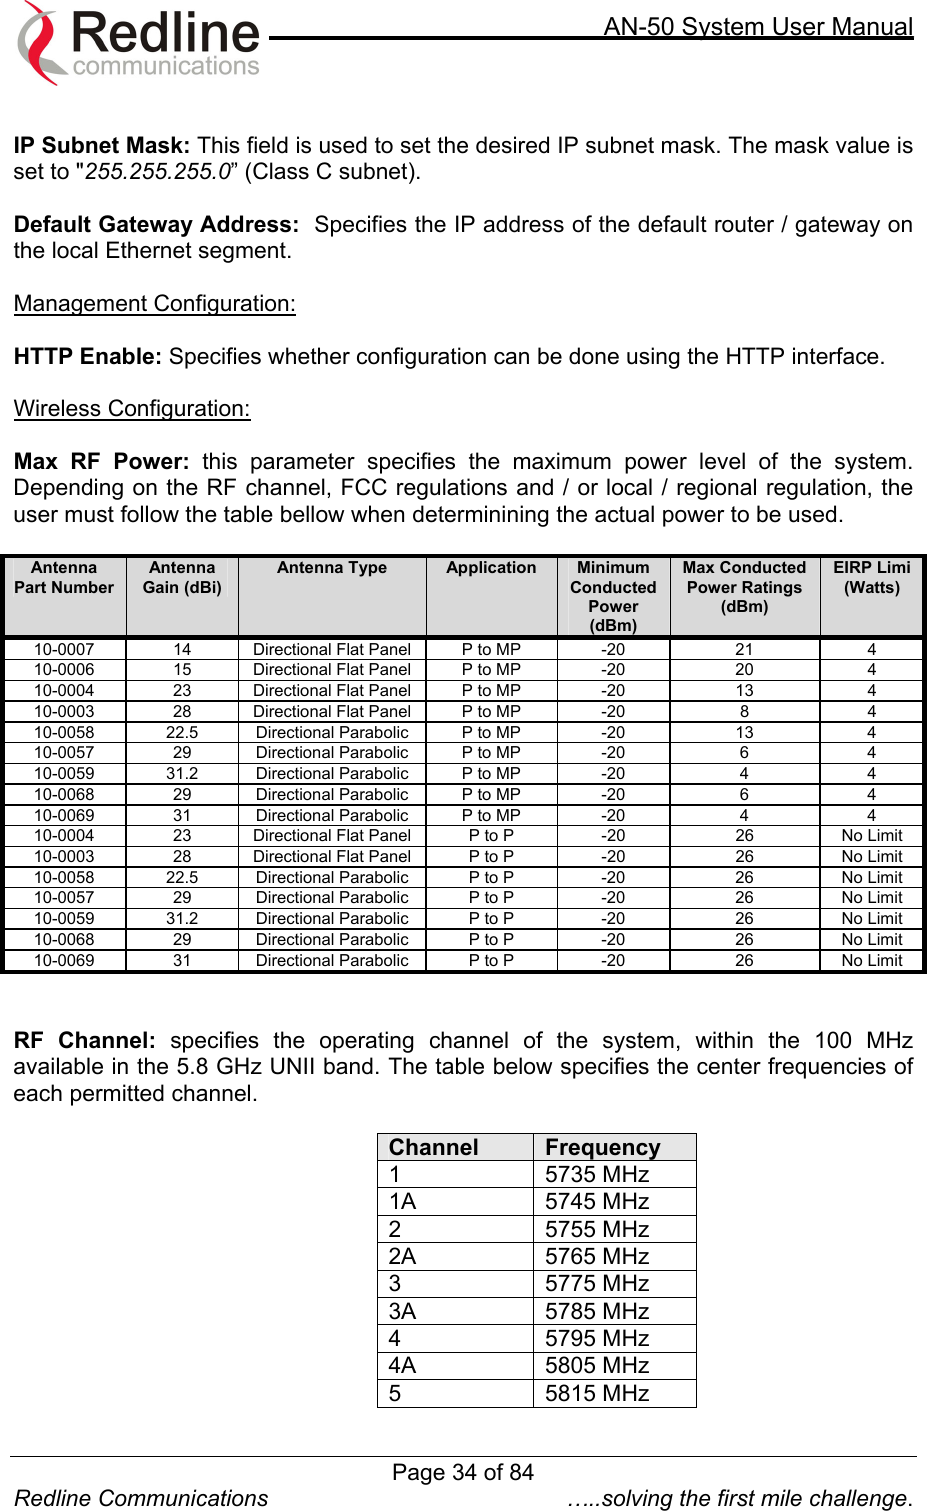     AN-50 System User Manual  Redline Communications  …..solving the first mile challenge.  IP Subnet Mask: This field is used to set the desired IP subnet mask. The mask value is set to &quot;255.255.255.0” (Class C subnet).  Default Gateway Address:  Specifies the IP address of the default router / gateway on the local Ethernet segment.  Management Configuration:  HTTP Enable: Specifies whether configuration can be done using the HTTP interface.  Wireless Configuration:  Max RF Power: this parameter specifies the maximum power level of the system. Depending on the RF channel, FCC regulations and / or local / regional regulation, the user must follow the table bellow when determinining the actual power to be used.  Antenna Part Number Antenna Gain (dBi) Antenna Type  Application  Minimum Conducted Power (dBm) Max Conducted Power Ratings (dBm) EIRP Limi (Watts) 10-0007  14  Directional Flat Panel  P to MP  -20  21  4 10-0006  15  Directional Flat Panel  P to MP  -20  20  4 10-0004  23  Directional Flat Panel  P to MP  -20  13  4 10-0003  28  Directional Flat Panel  P to MP  -20  8  4 10-0058  22.5  Directional Parabolic  P to MP  -20  13  4 10-0057  29  Directional Parabolic  P to MP  -20  6  4 10-0059  31.2  Directional Parabolic  P to MP  -20  4  4 10-0068  29  Directional Parabolic  P to MP  -20  6  4 10-0069  31  Directional Parabolic  P to MP  -20  4  4 10-0004  23  Directional Flat Panel  P to P  -20  26  No Limit 10-0003  28  Directional Flat Panel  P to P  -20  26  No Limit 10-0058  22.5  Directional Parabolic  P to P  -20  26  No Limit 10-0057  29  Directional Parabolic  P to P  -20  26  No Limit 10-0059  31.2  Directional Parabolic  P to P  -20  26  No Limit 10-0068  29  Directional Parabolic  P to P  -20  26  No Limit 10-0069  31  Directional Parabolic  P to P  -20  26  No Limit   RF Channel: specifies the operating channel of the system, within the 100 MHz available in the 5.8 GHz UNII band. The table below specifies the center frequencies of each permitted channel.  Channel  Frequency 1 5735 MHz 1A 5745 MHz 2 5755 MHz 2A 5765 MHz 3 5775 MHz 3A 5785 MHz 4 5795 MHz 4A 5805 MHz 5 5815 MHz  Page 34 of 84